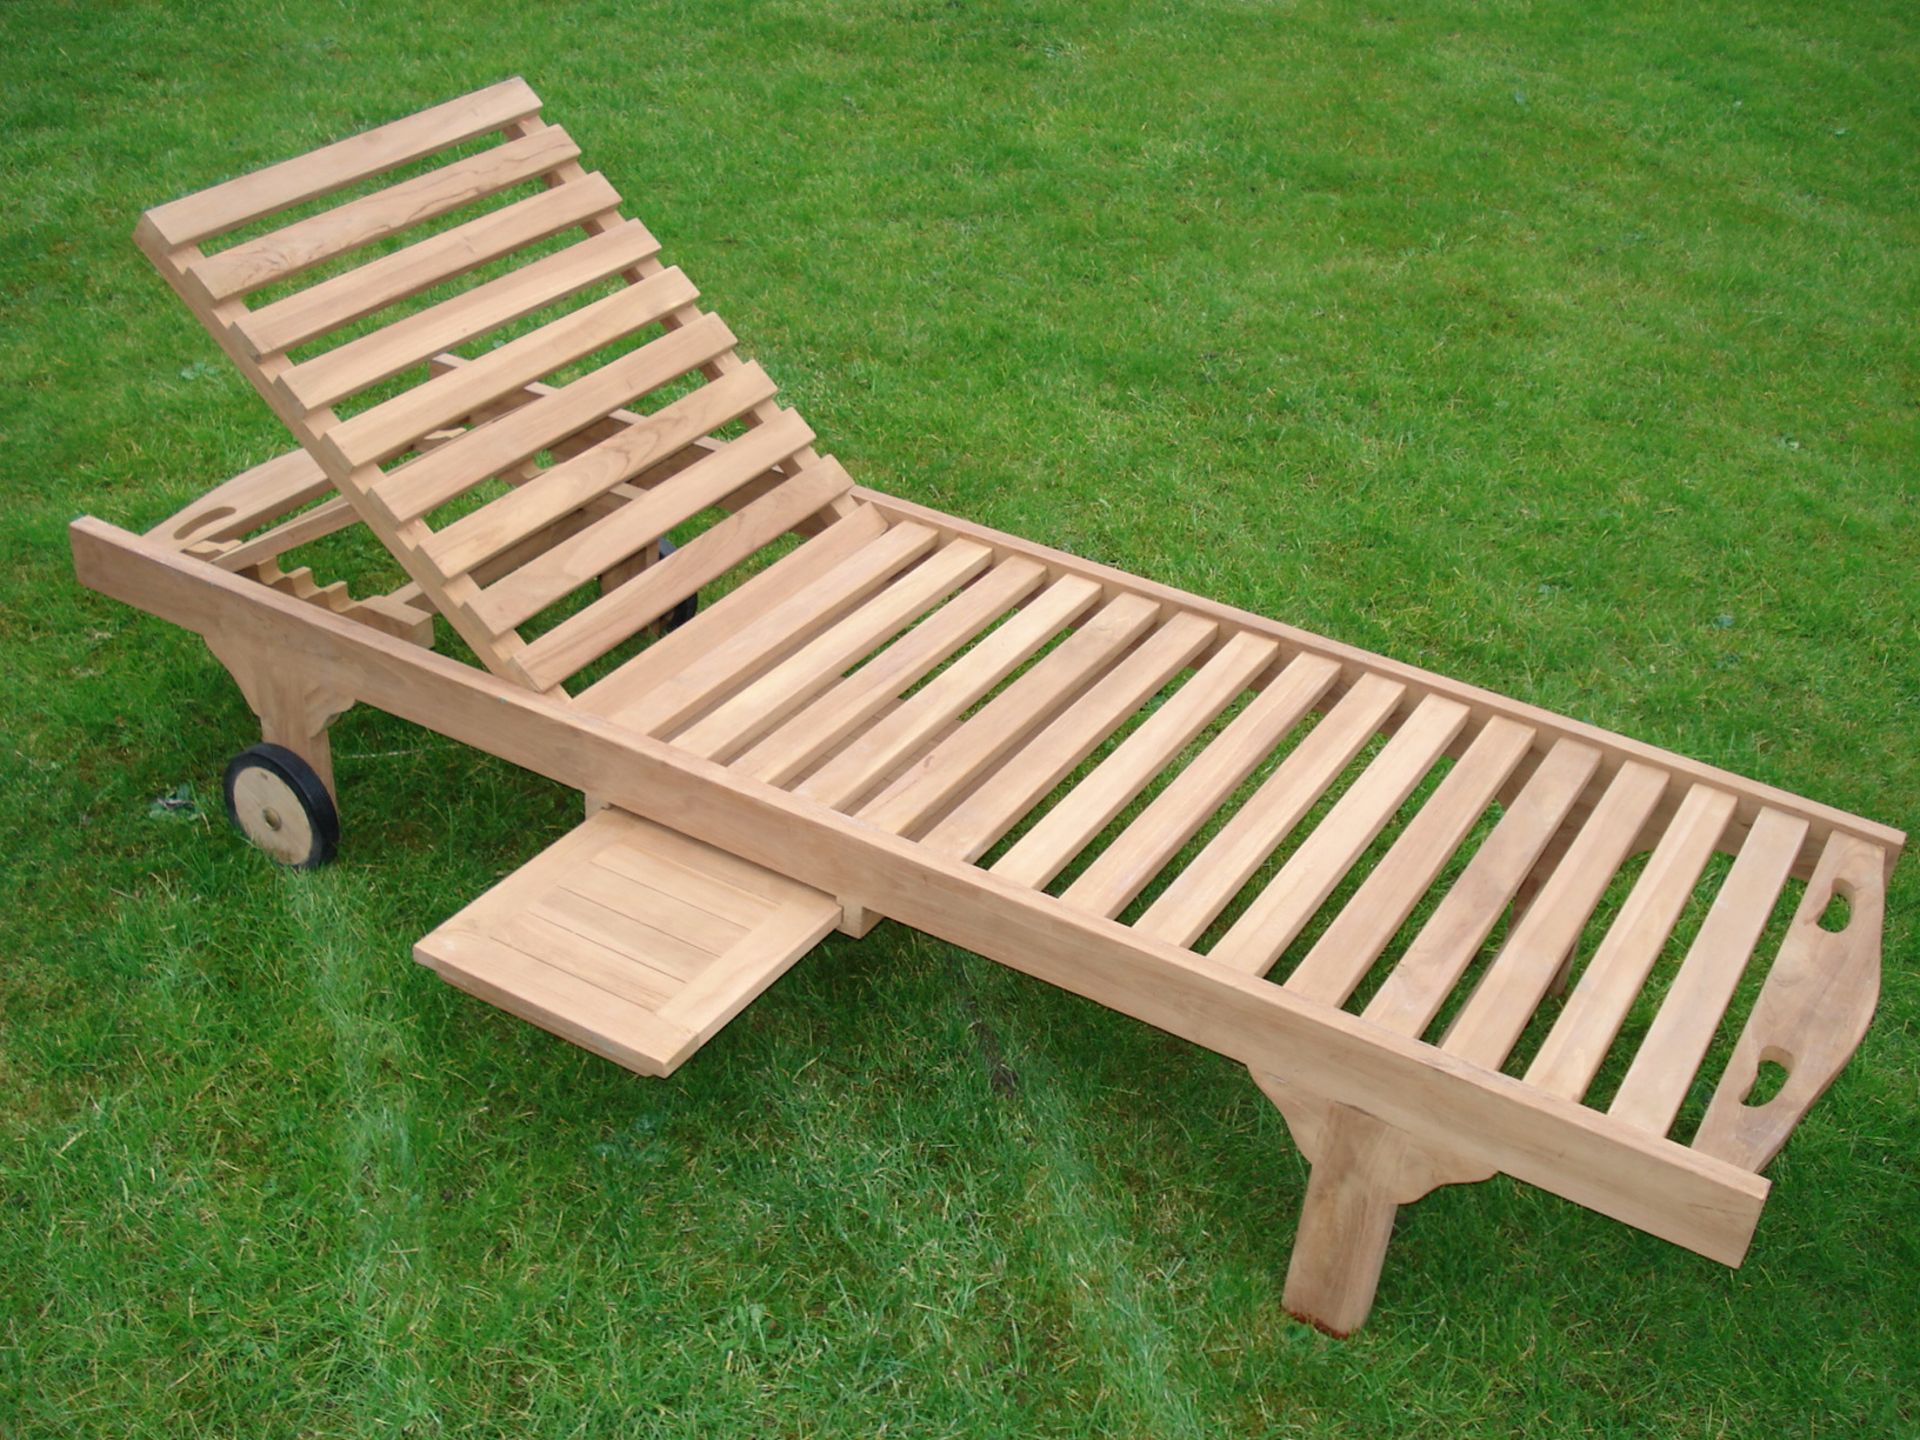 NEW PACKAGED SOLID TEAK SUNLOUNGER ON RUBBER BOUND TEAK WHEELS, WITH EXTENDING SIDE TABLE